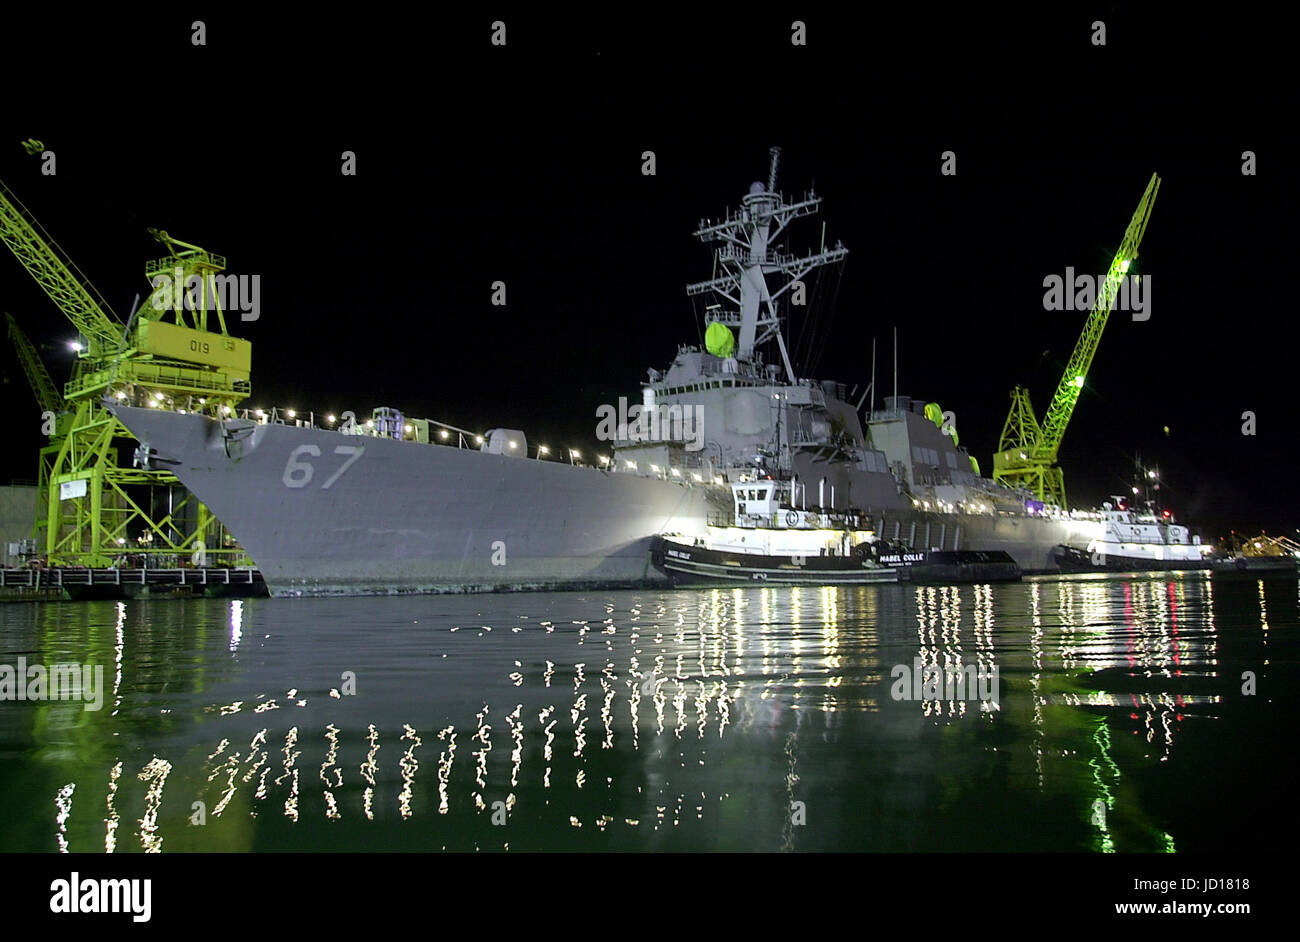 Tugs gently push the USS Cole to its mooring at the Ingalls Shipyard in Pascagoula, Miss., on Dec. 24, 2000.  The Arleigh Burke class destroyer was the target of a terrorist attack in the port of Aden, Yemen, on Oct. 12, 2000, during a scheduled refueling.  The attack killed 17 crew members and injured 39 others.  The Cole was transported from Aden to Pascagoula by the Norwegian heavy transport ship M/V Blue Marlin.    DoD photo by Chief Petty Officer Johnny R. Wilson, U.S. Navy Stock Photo